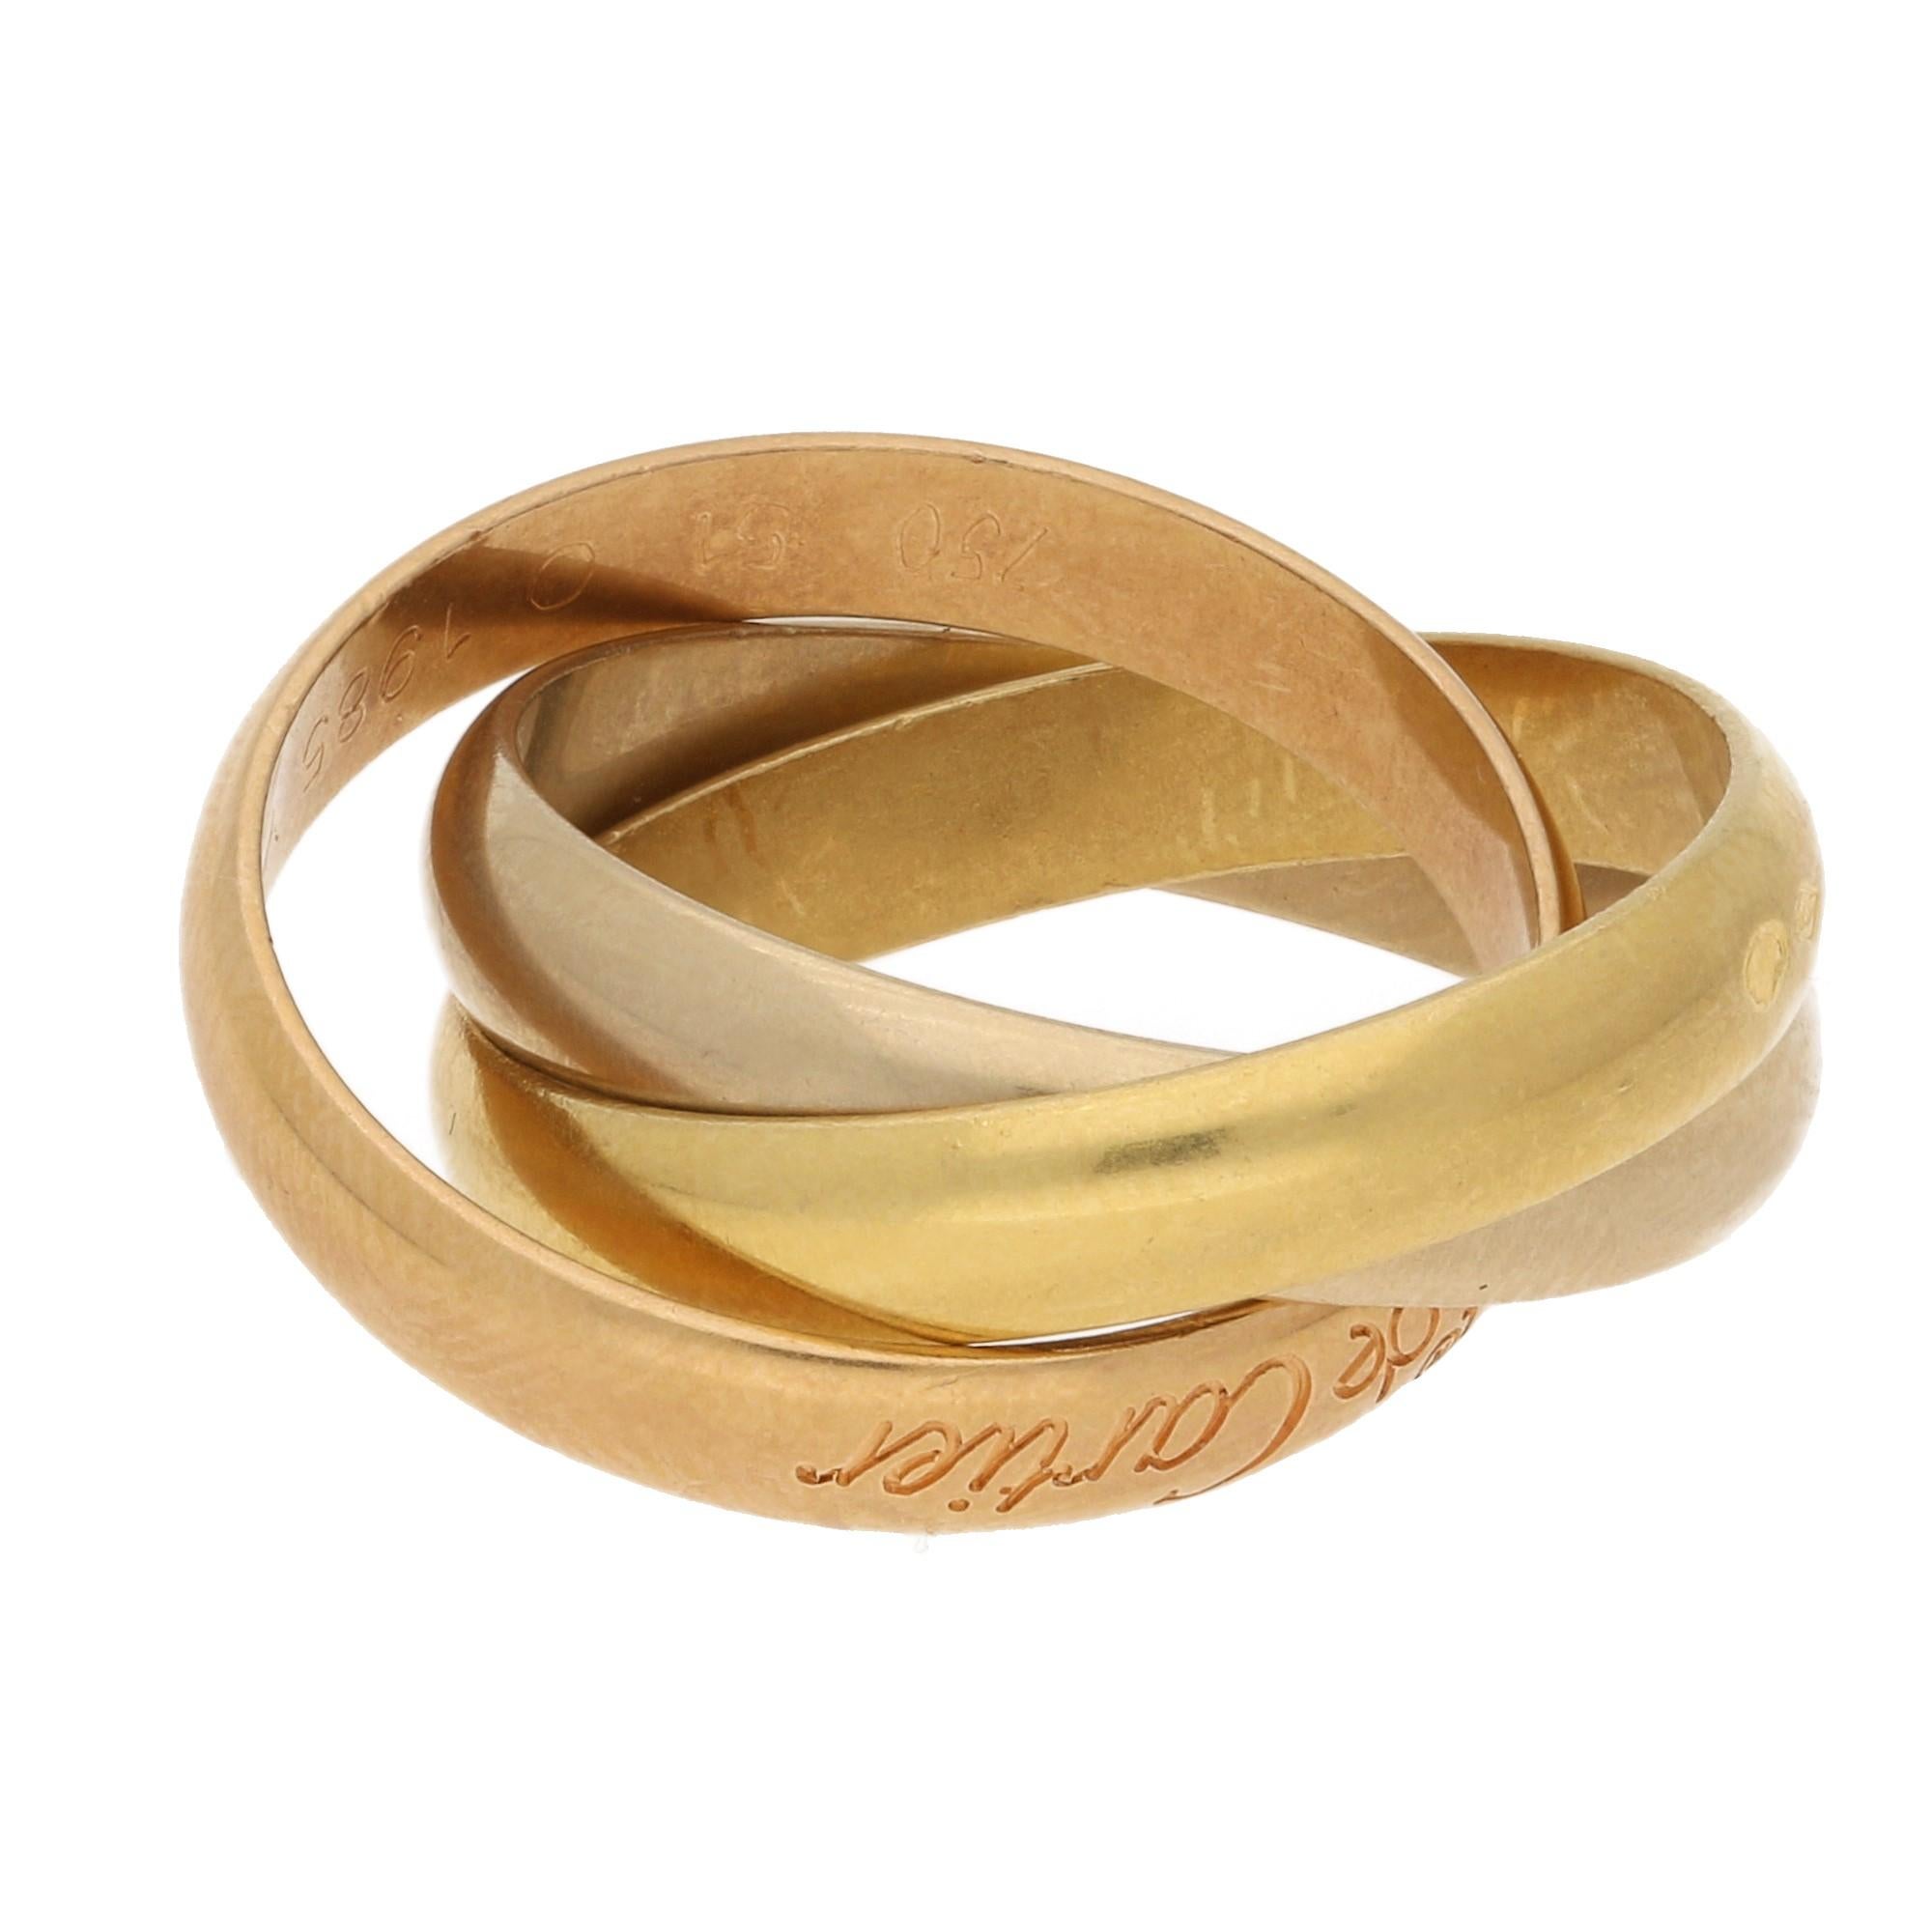 A classic trinity tri-colour ring in 18 karat yellow, white and rose gold by Cartier, signed on the rose gold band 'Les Must De Cartier' with French maker's marks on each of the insecting bands. UK size K, US size 5.5.